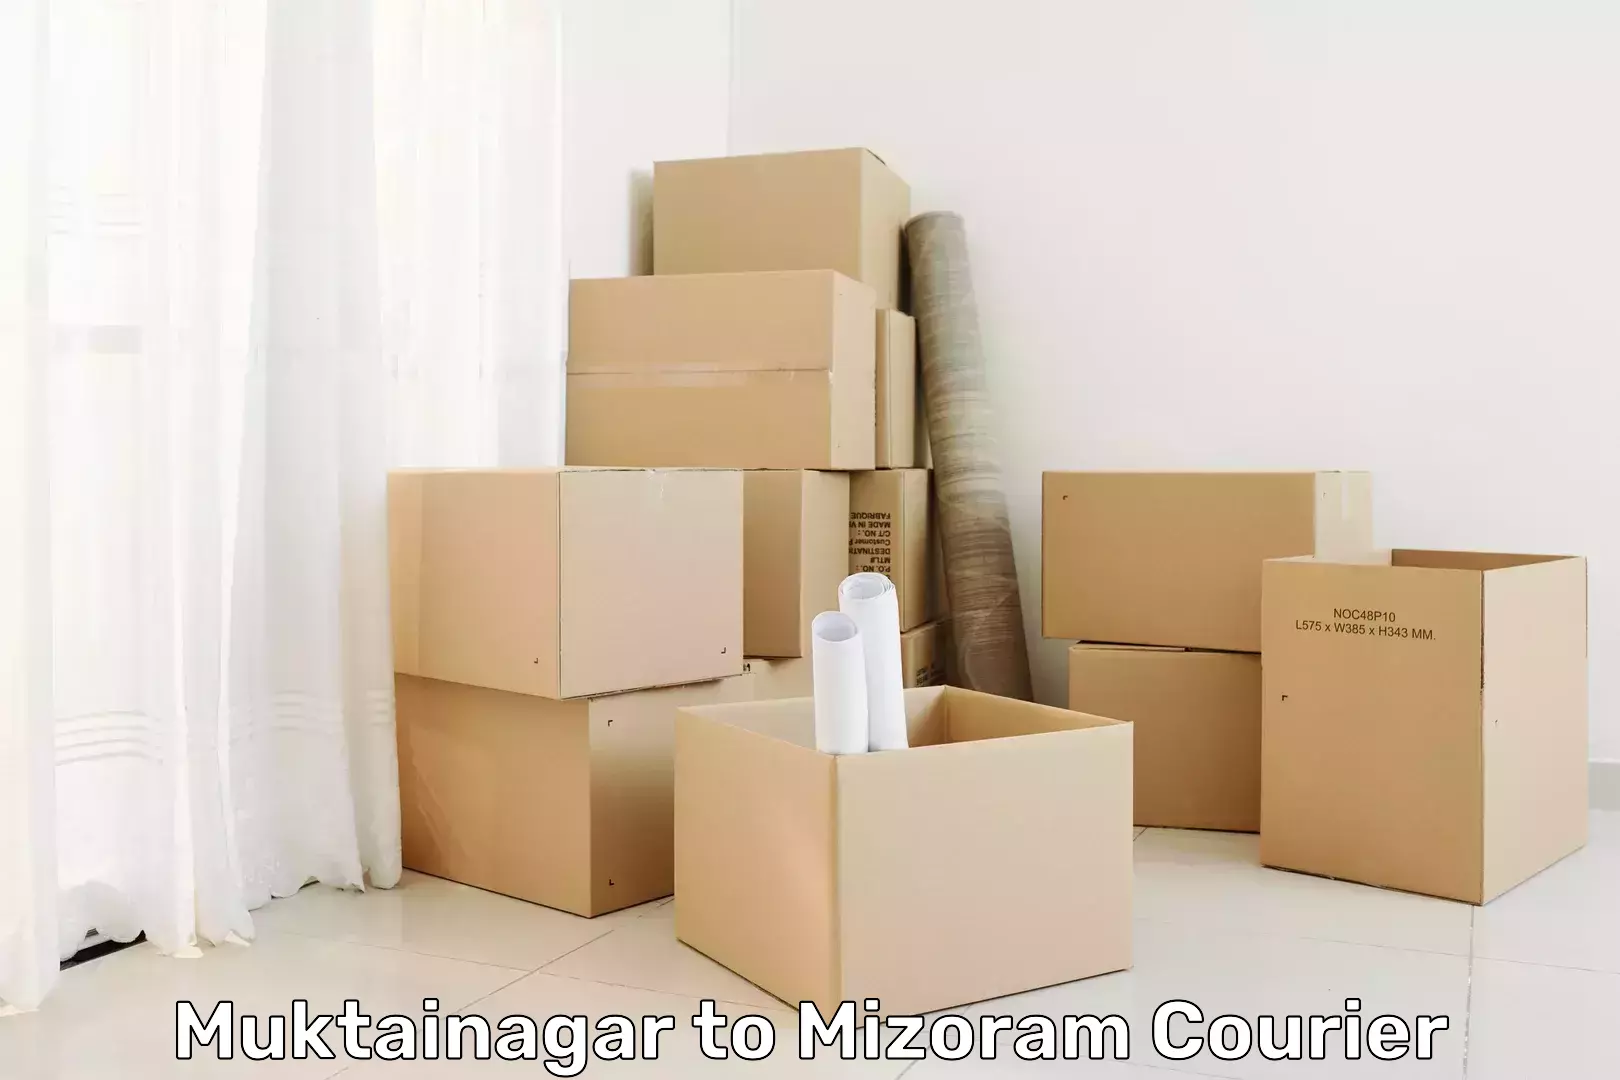 Package delivery network Muktainagar to Mizoram